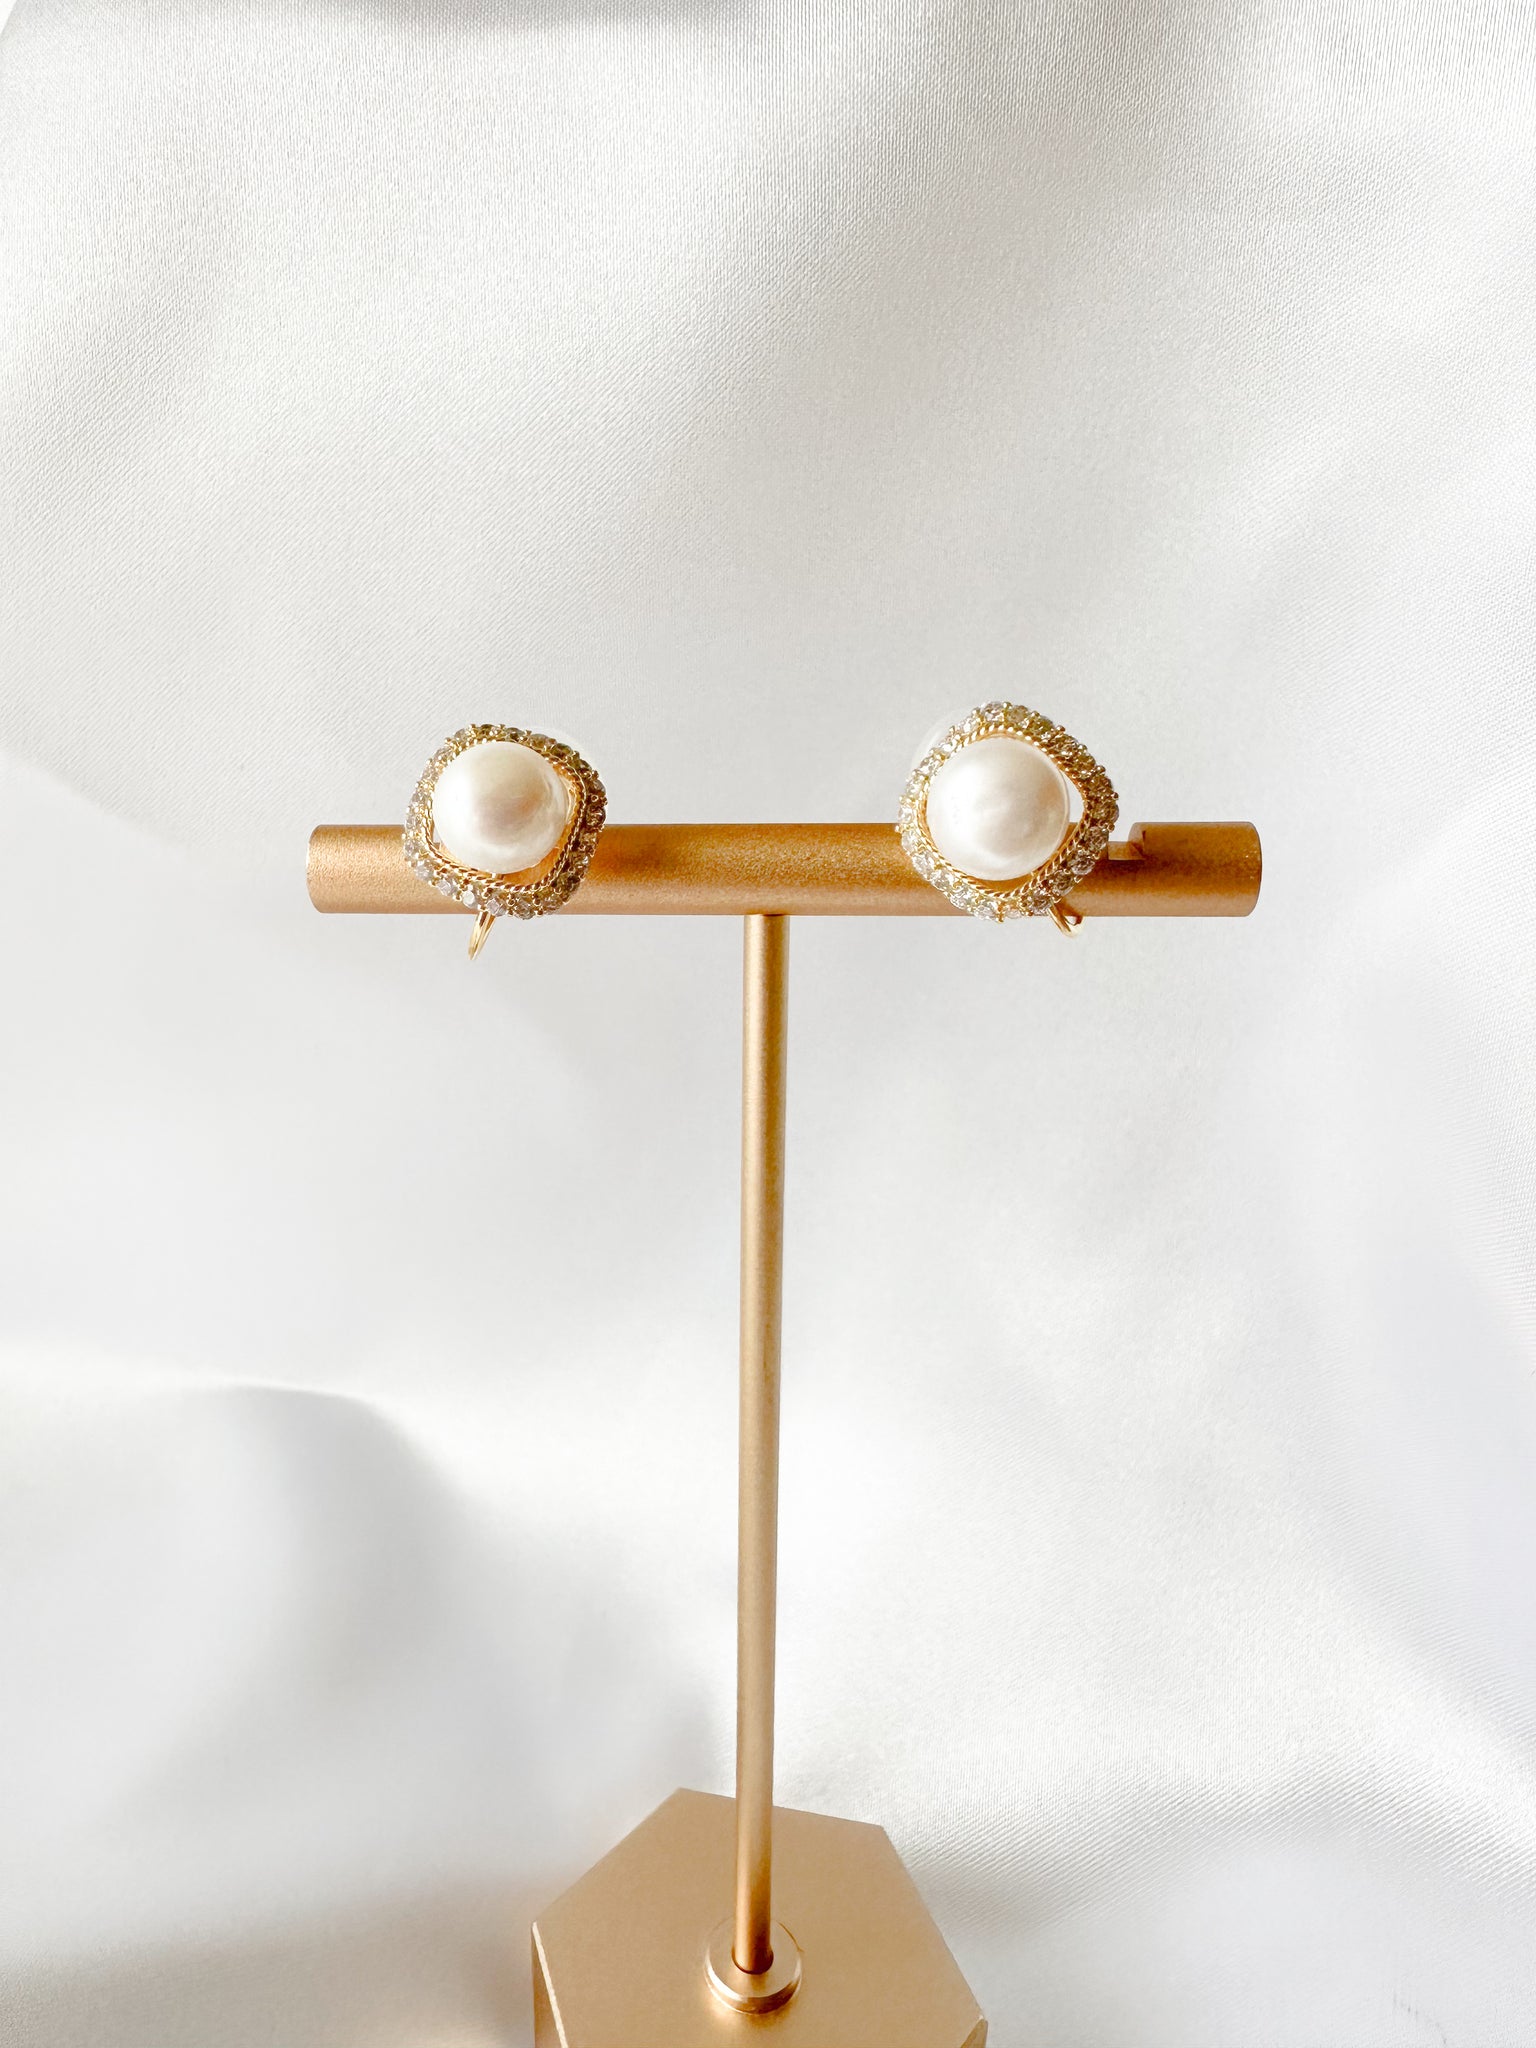 pearl clip-on earrings with tiny gems surrounding perimenter